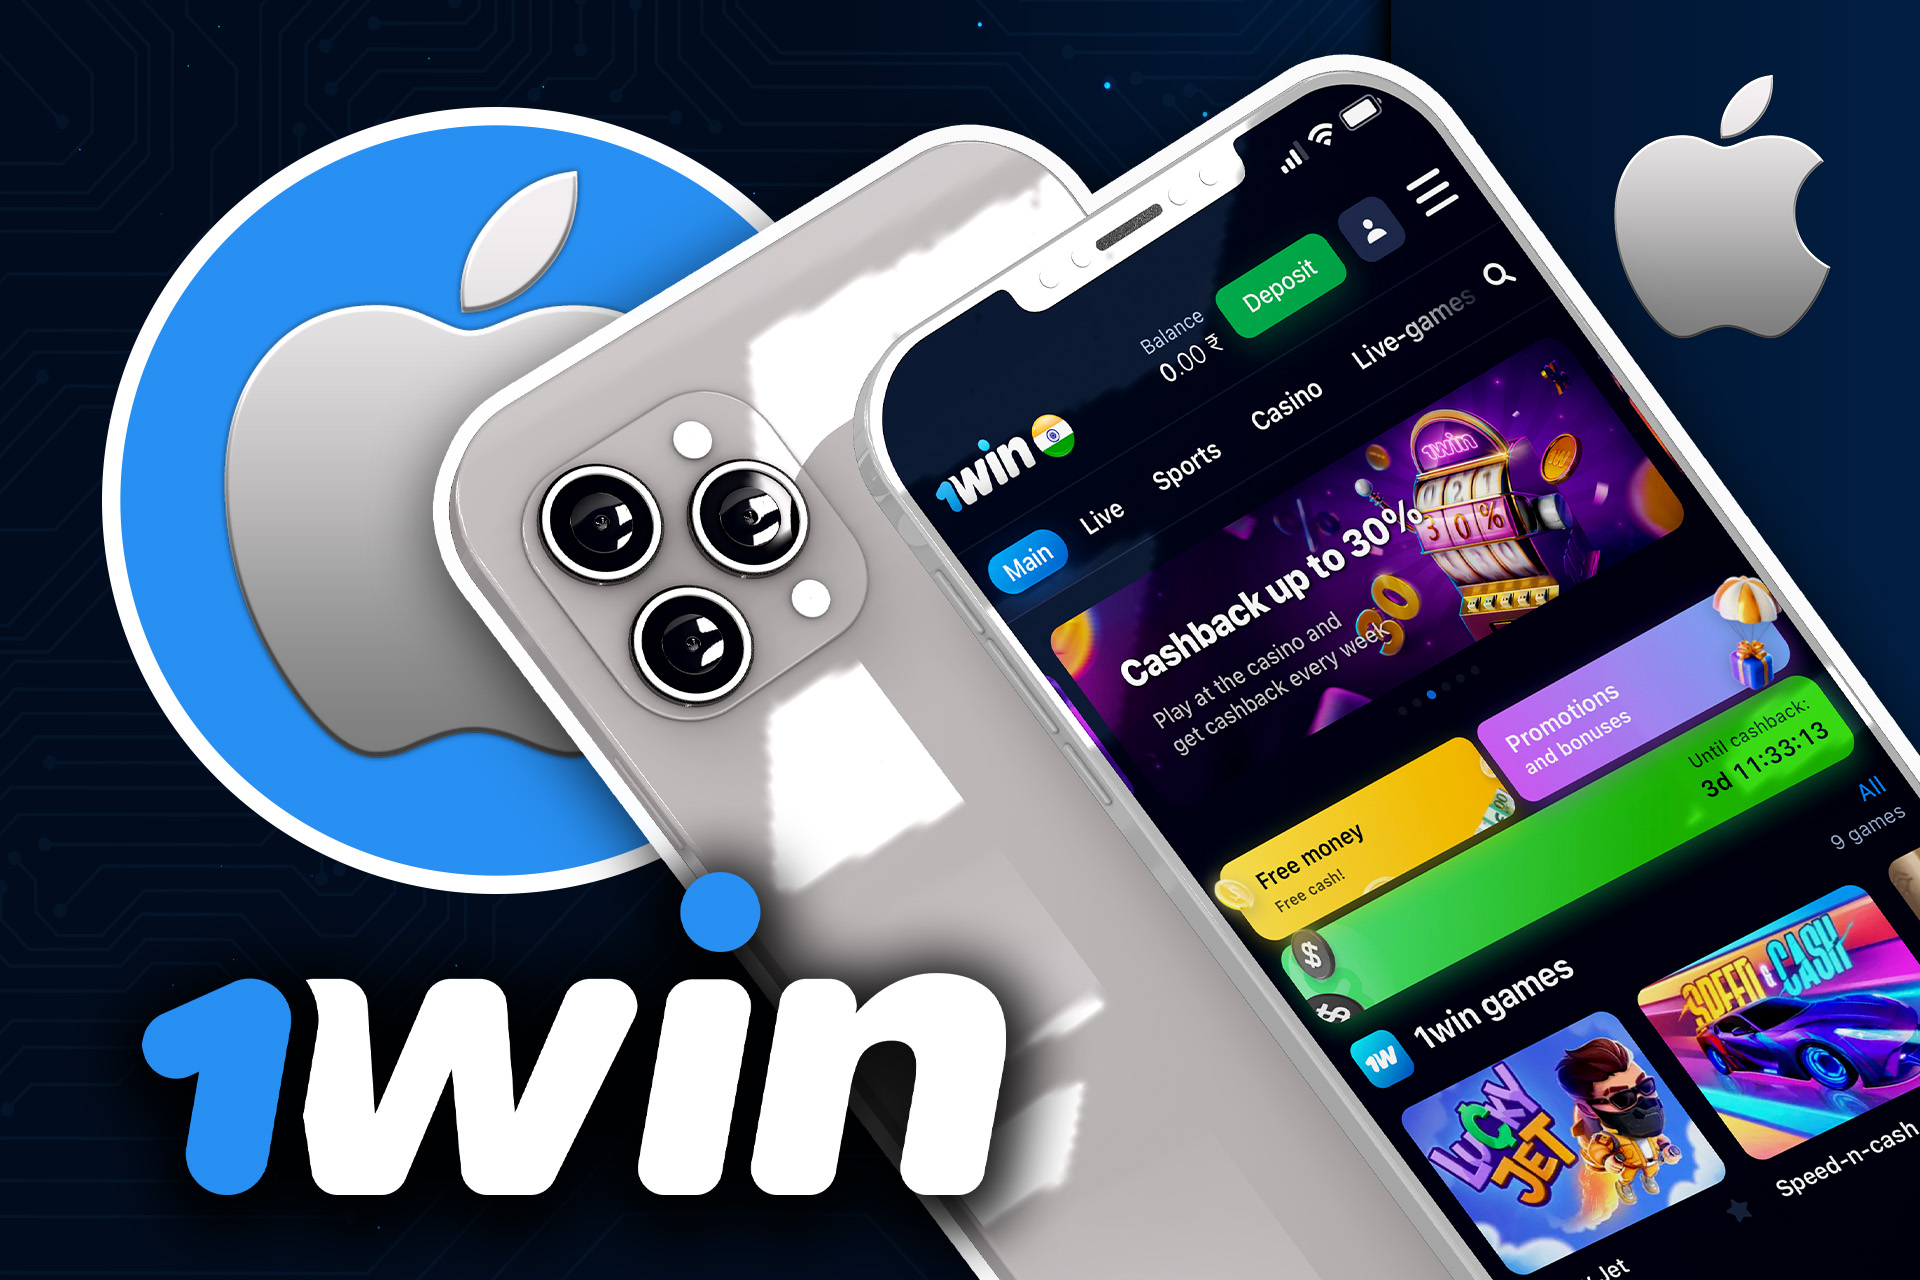 You can install the 1win app on your iPhone or iPad.